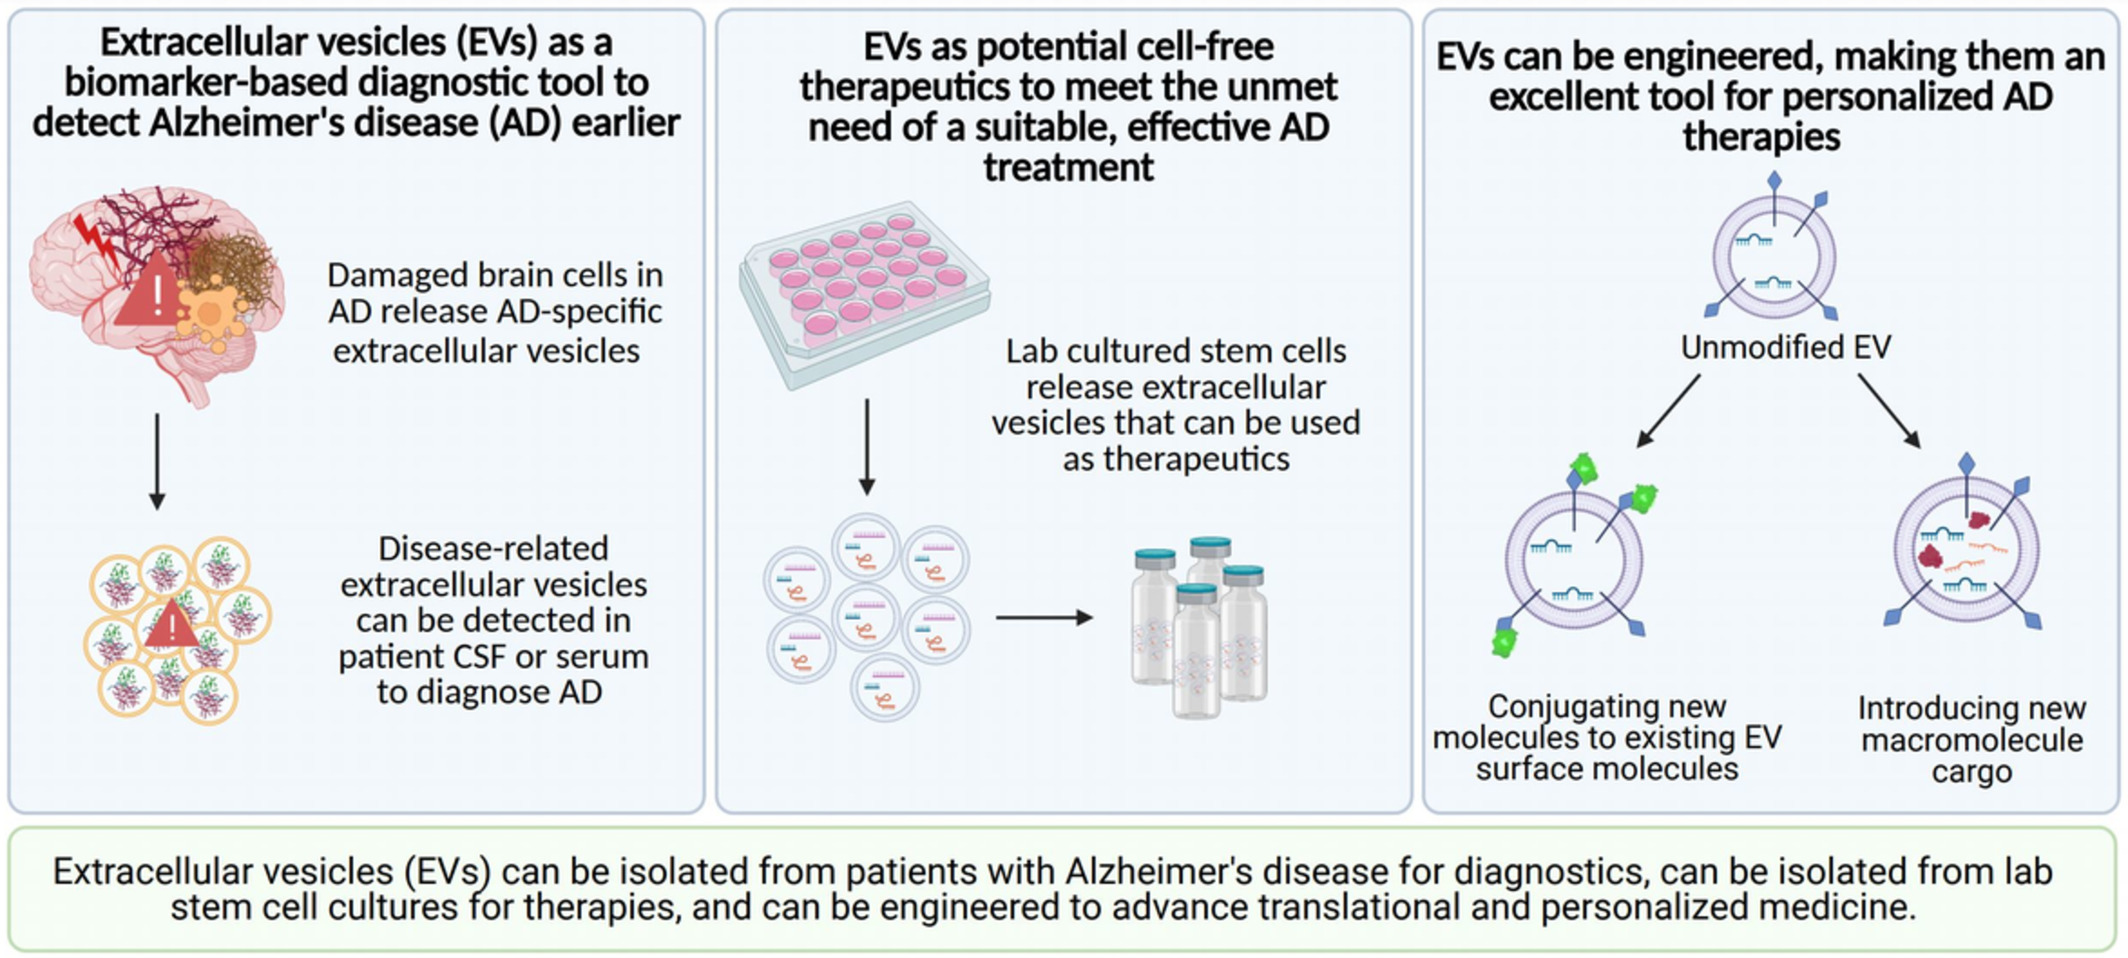 Engineering extracellular vesicles for Alzheimer's disease: An emerging cell‐free approach for earlier diagnosis and treatment